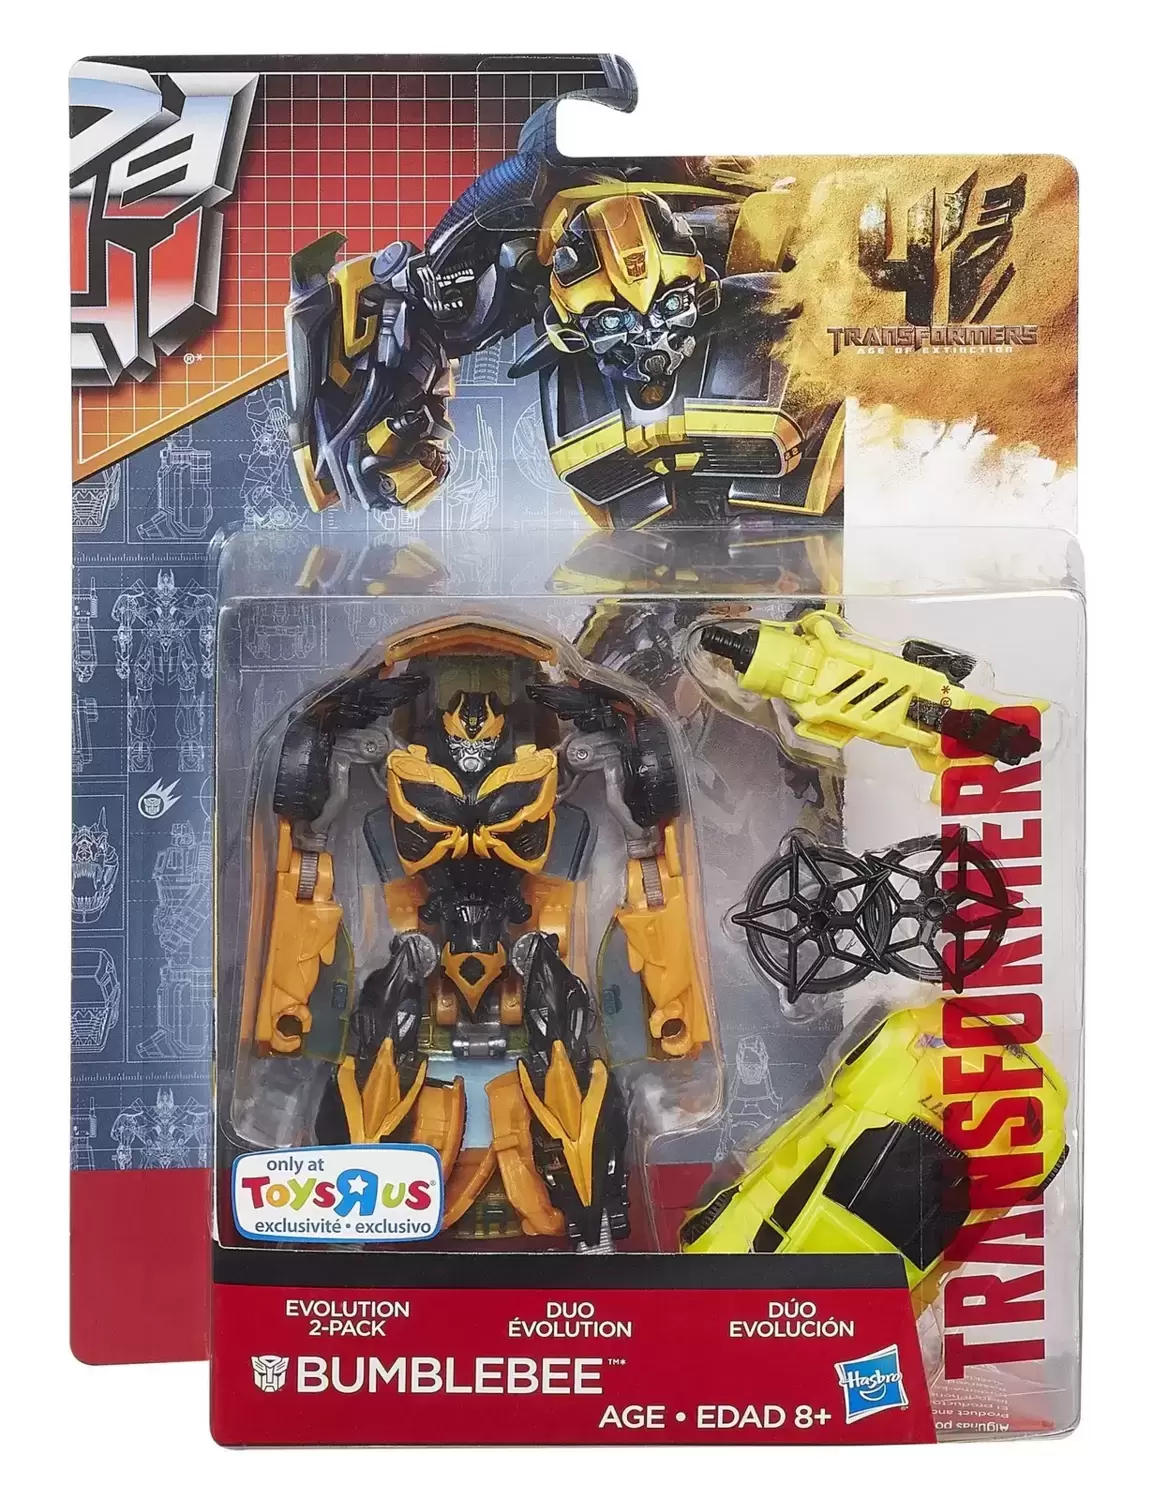 Transformers Age of Extinction - Bumblebee